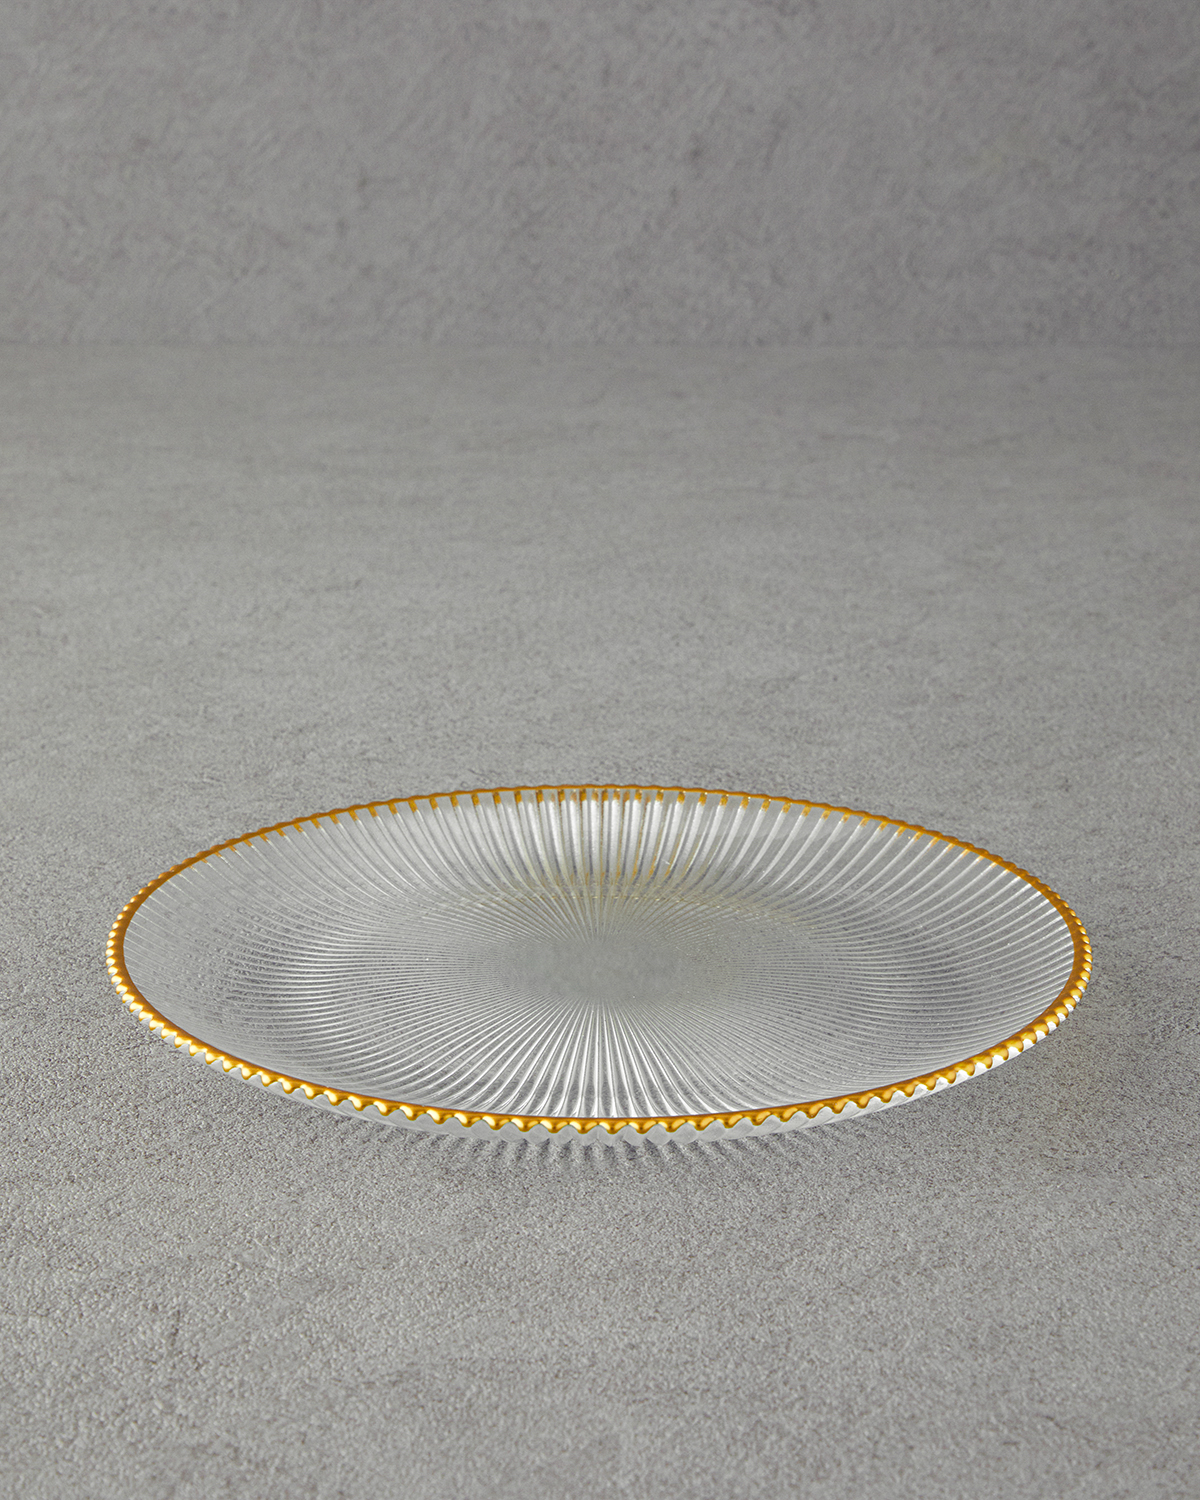 Graceful Shapes Glass Cake Plate 21 Cm Gold